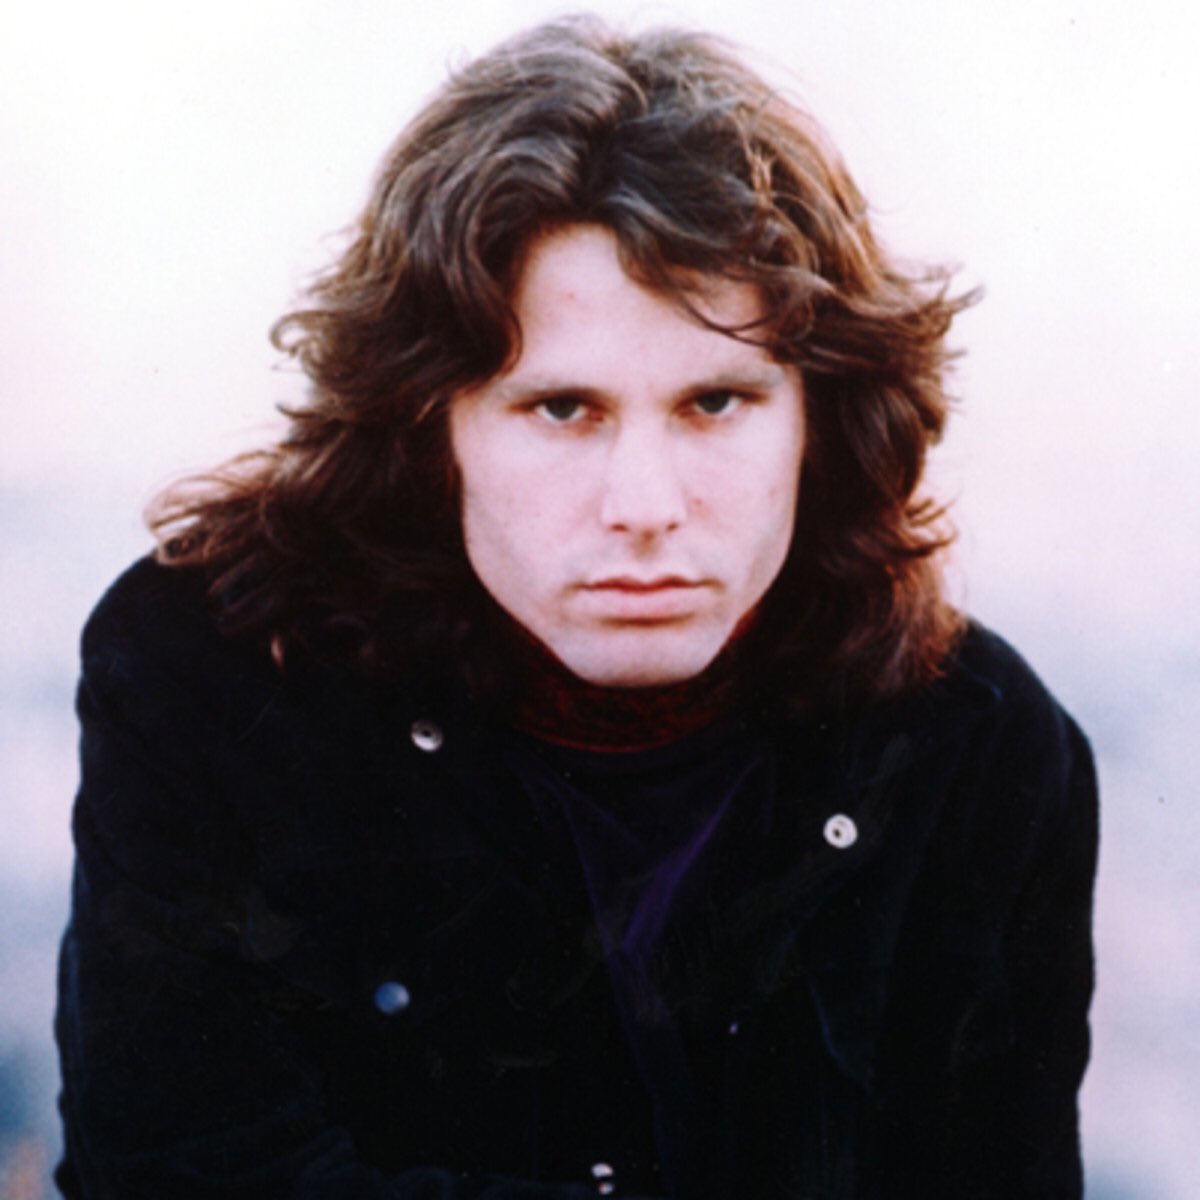 Happy Birthday to The Lizard King! Jim Morrison would\ve been 74 today 